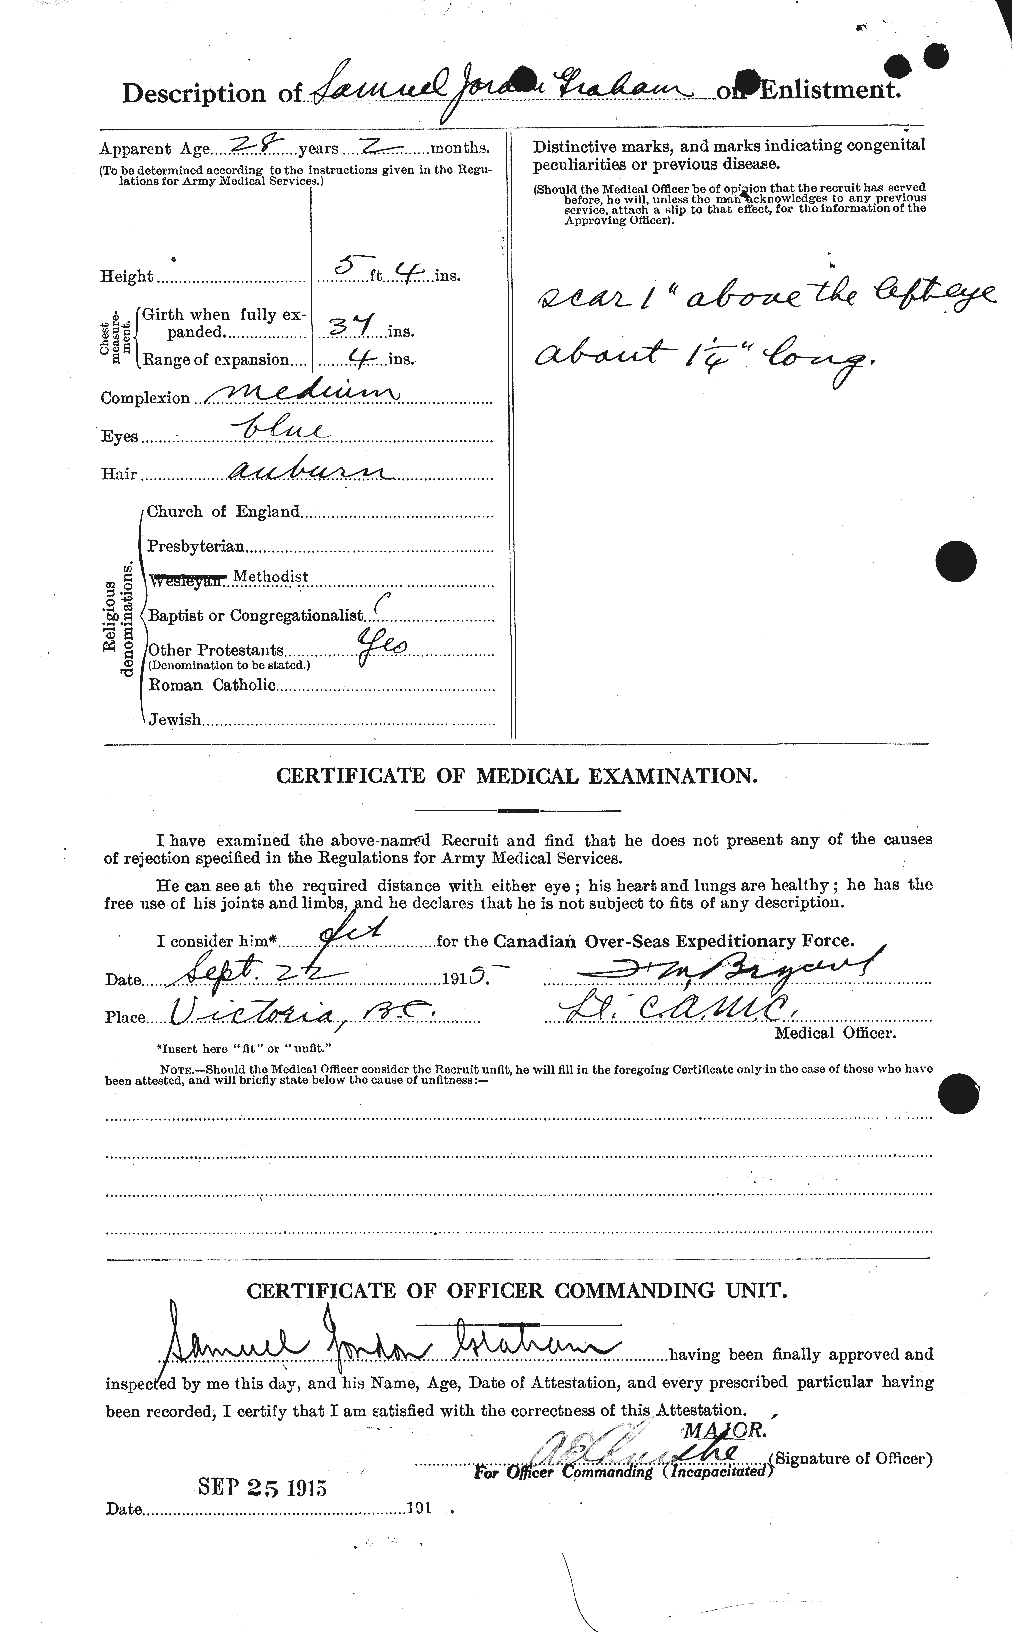 Personnel Records of the First World War - CEF 359458b